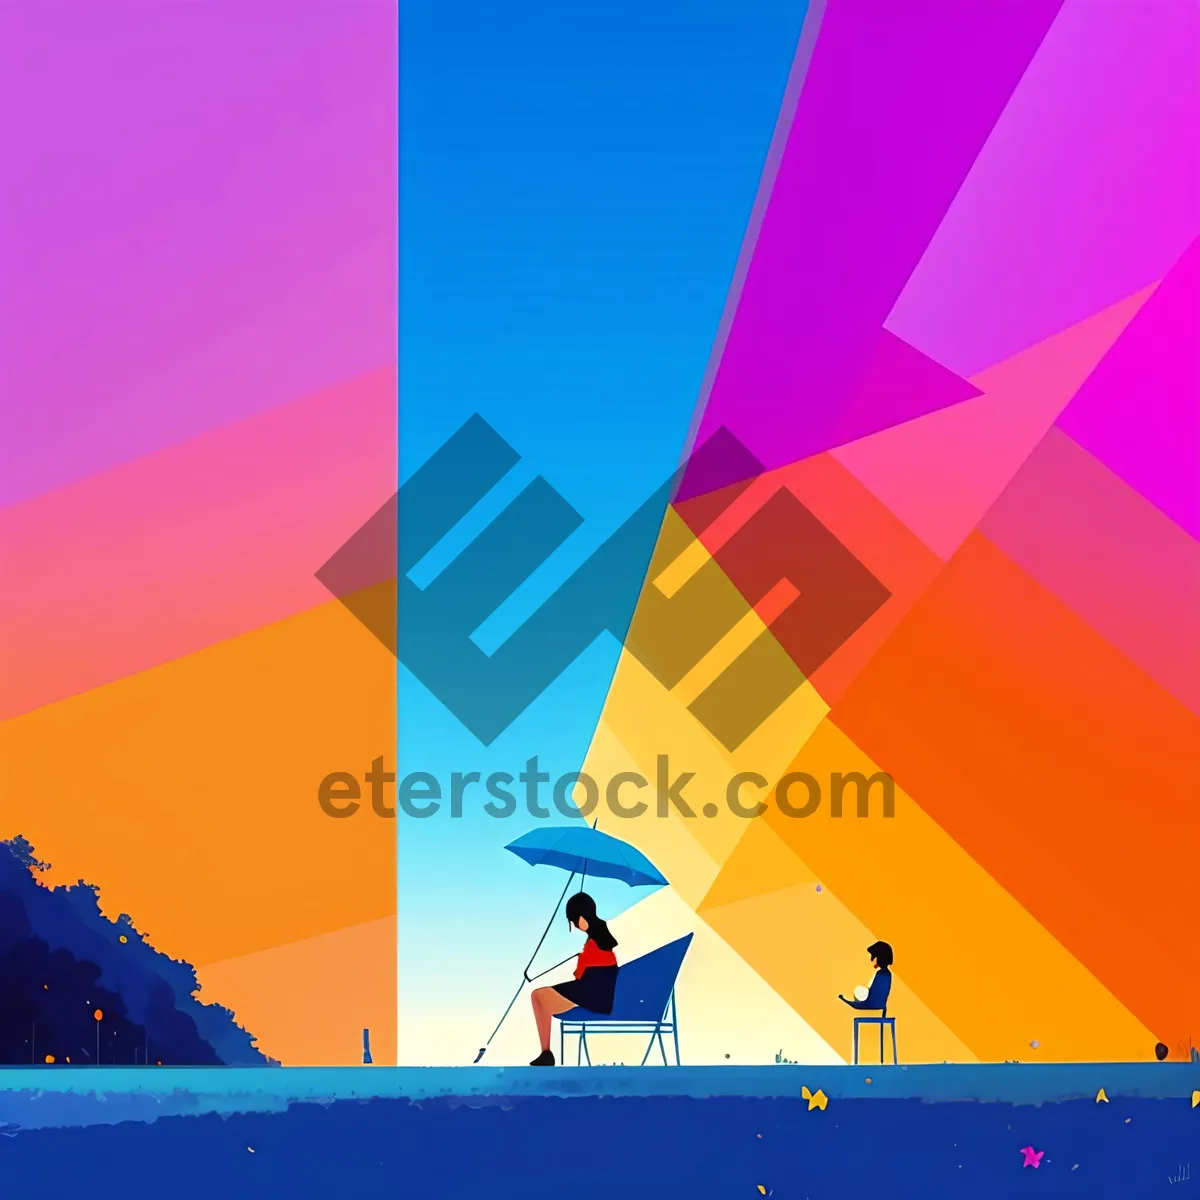 Picture of Silhouette Flag Design - Export Image